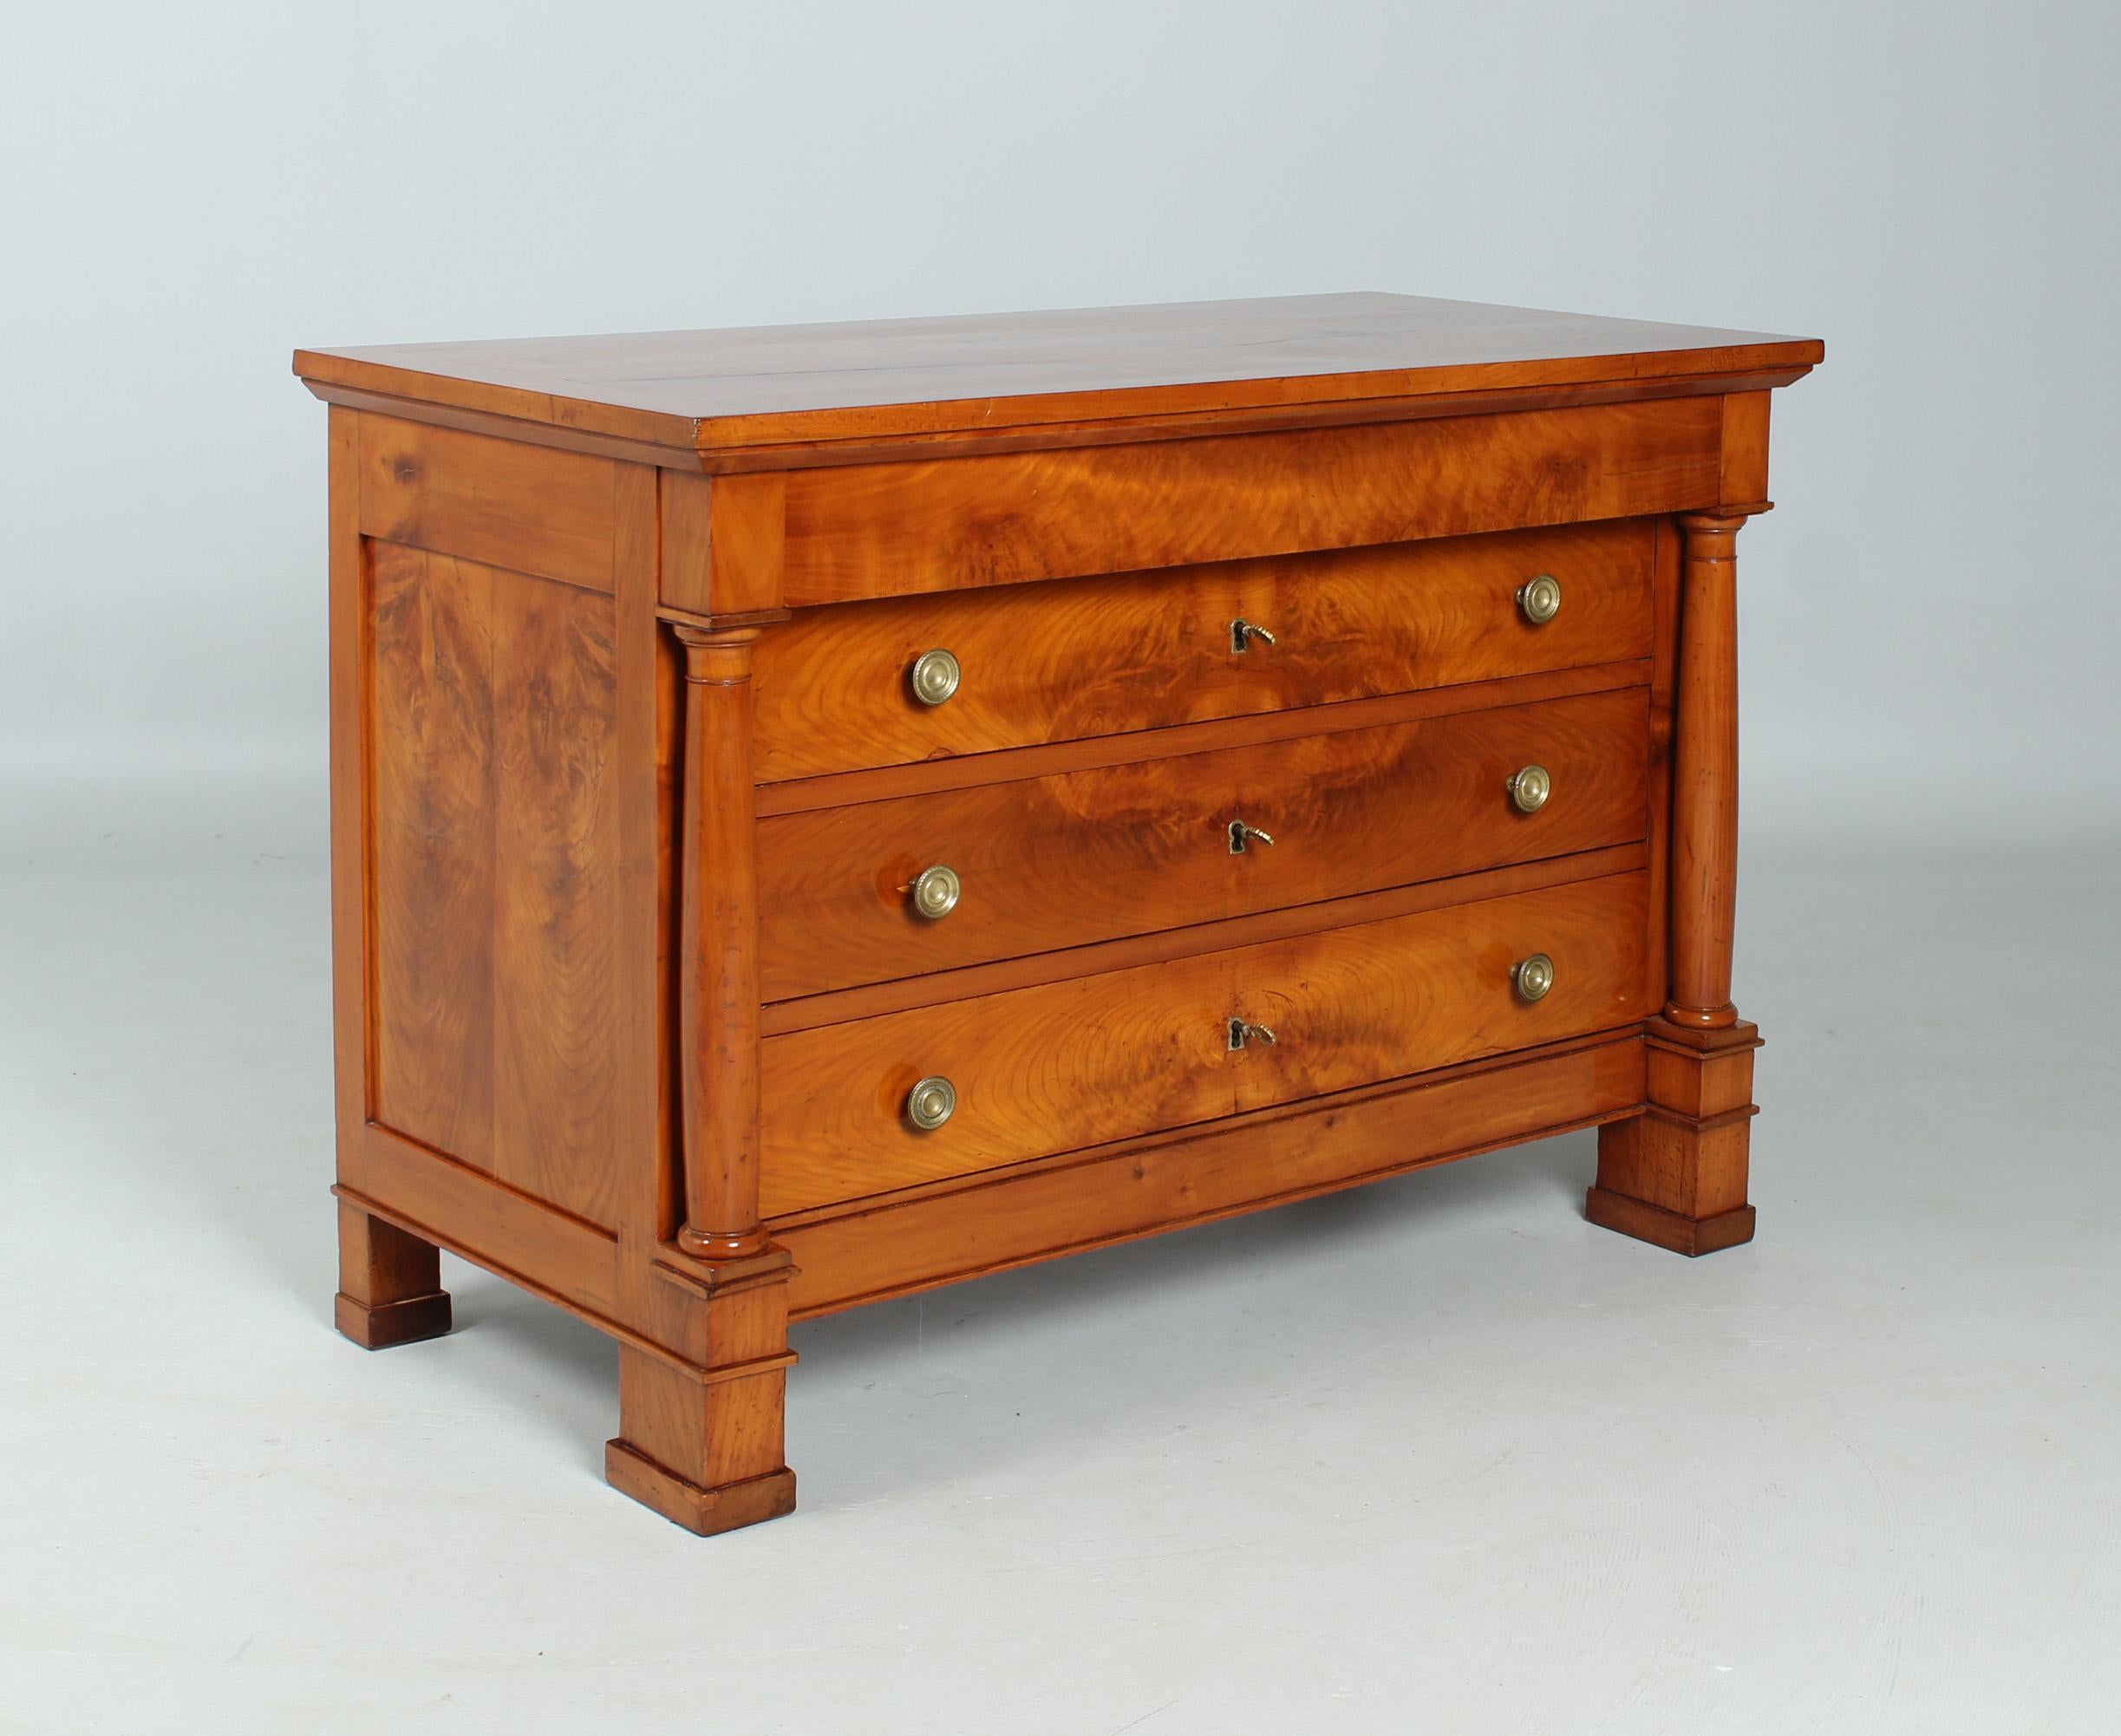 Antique cherry wood chest of drawers with columns

France
Cherry tree
around 1830

Dimensions: H x W x D: 90 x 124 x 62 cm

Description:
Antique French cherry veneered chest of drawers with neatly laid grain pattern.

The four drawers stand on